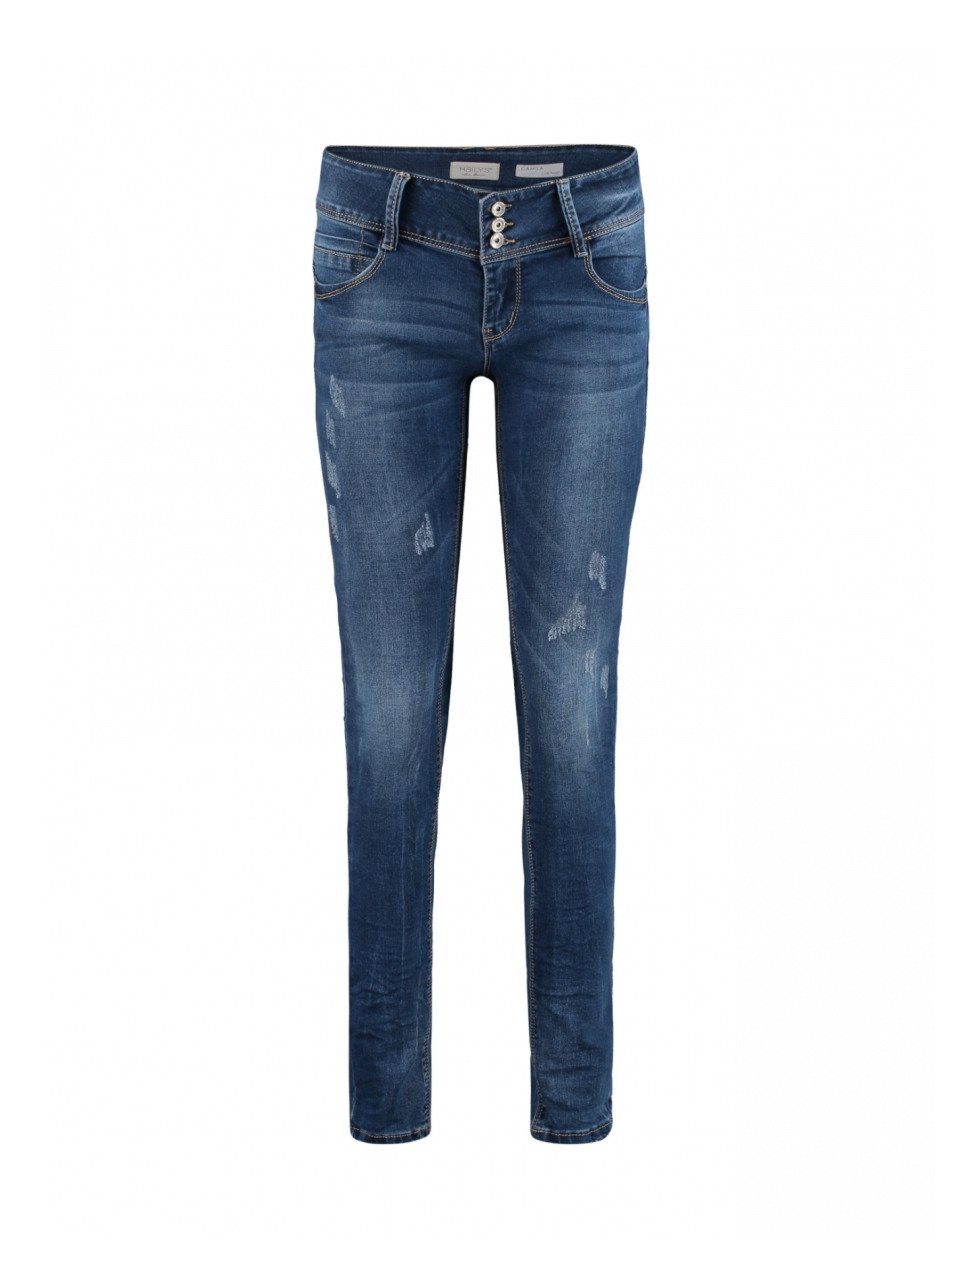 HaILY’S mblue Camila Skinny-fit-Jeans